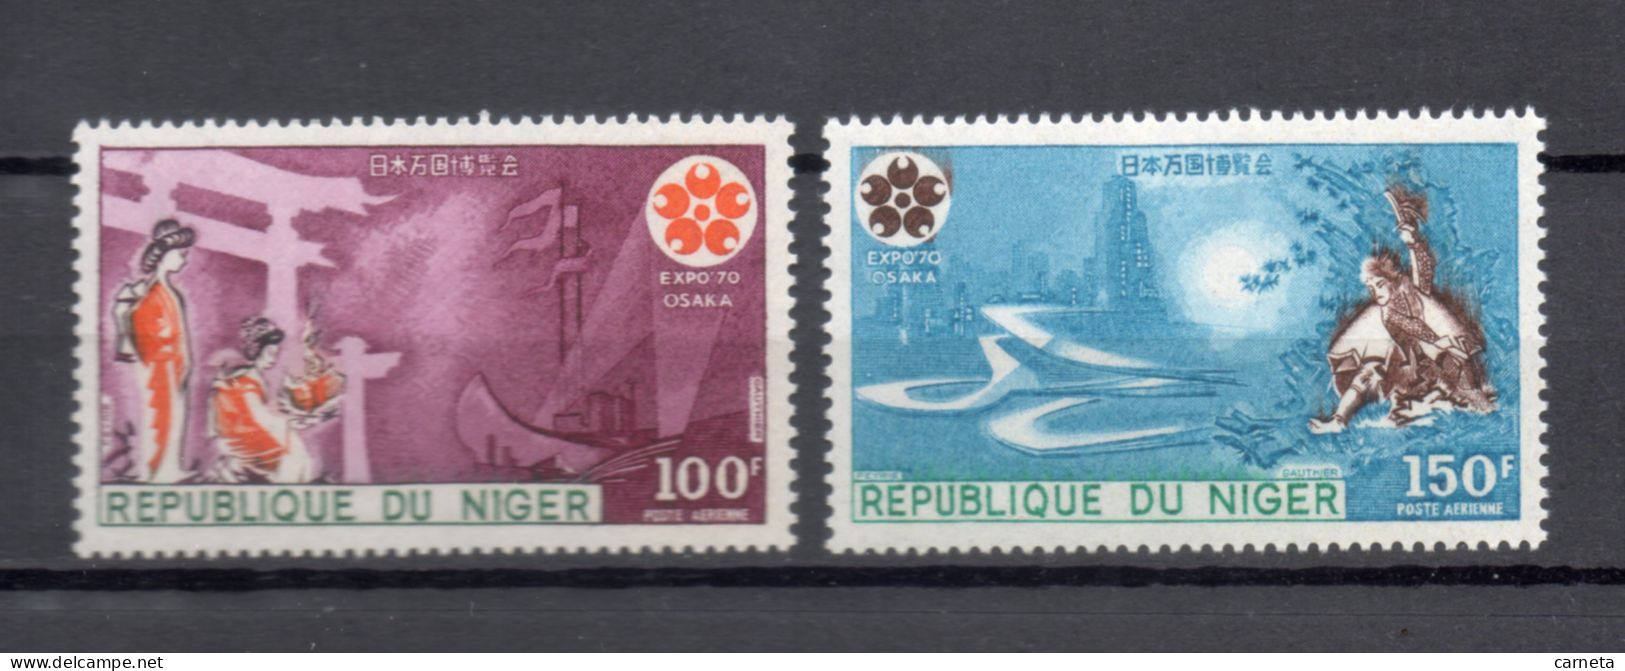 NIGER  PA  N° 135 + 136     NEUFS SANS CHARNIERE  COTE 4.00€   EXPOSITION OSAKA JAPON - Niger (1960-...)